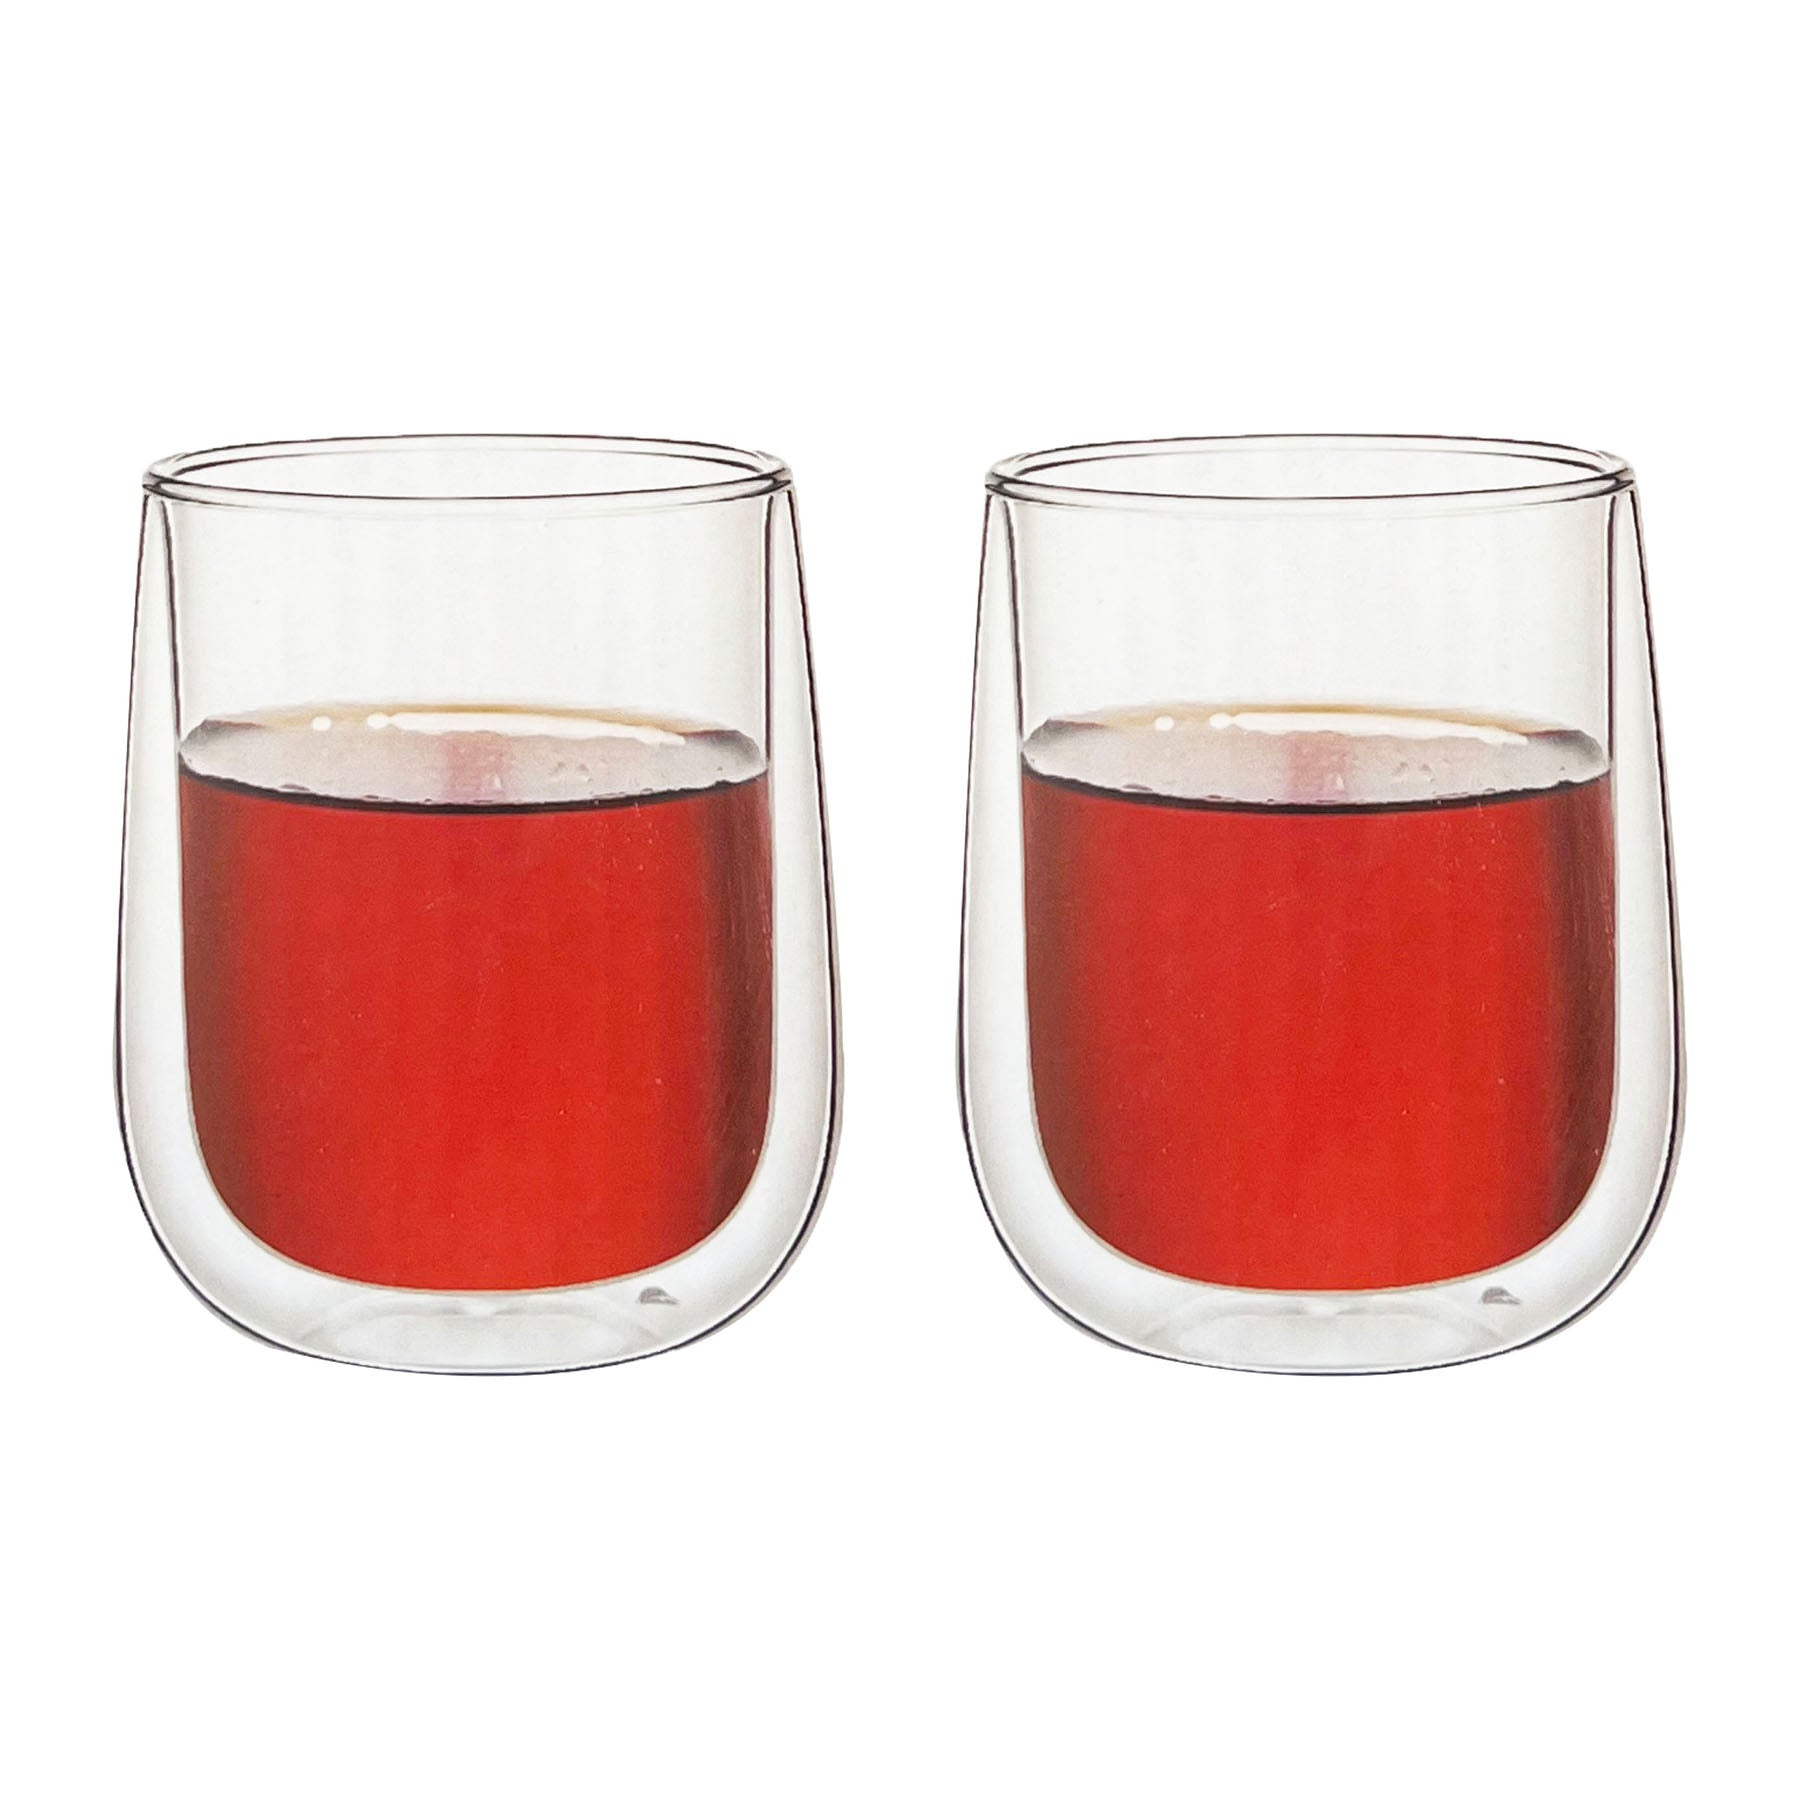 Double Wall Glass cup